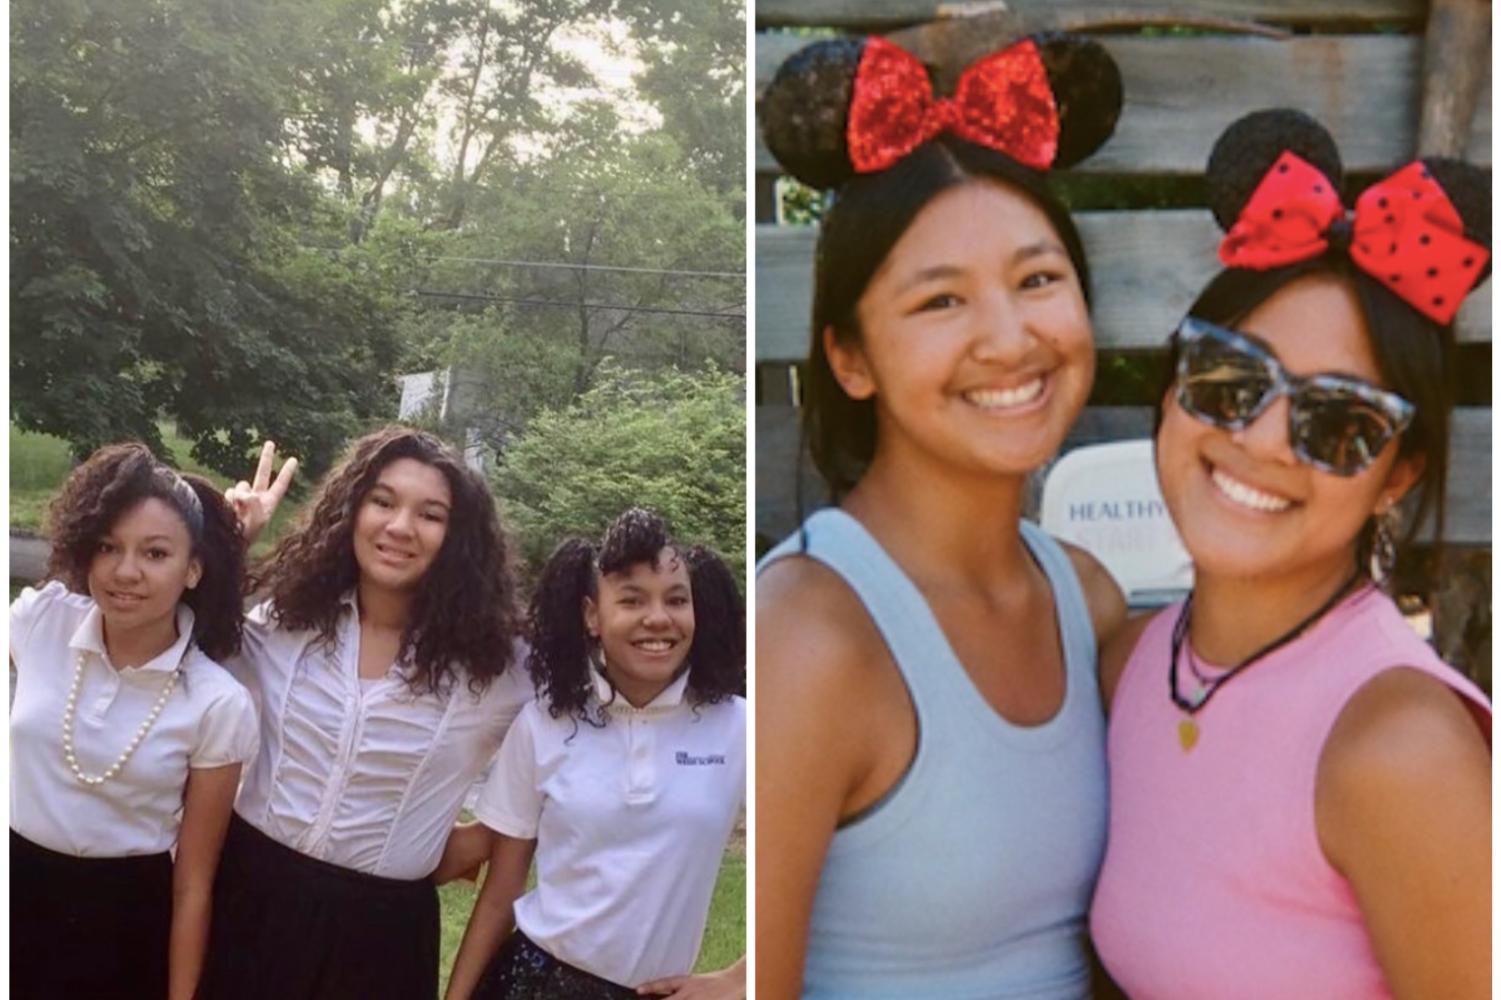 The Wilson triplets (left, Katie, Elizabeth and Victoria) pose in matching outfits while the Cao twins (right, Isabella and Angelina) couldn’t look more different in their Disneyland photo. Graduating will be a bittersweet moment for both sets of sisters as theyll have to split from one another as they head off to college. 